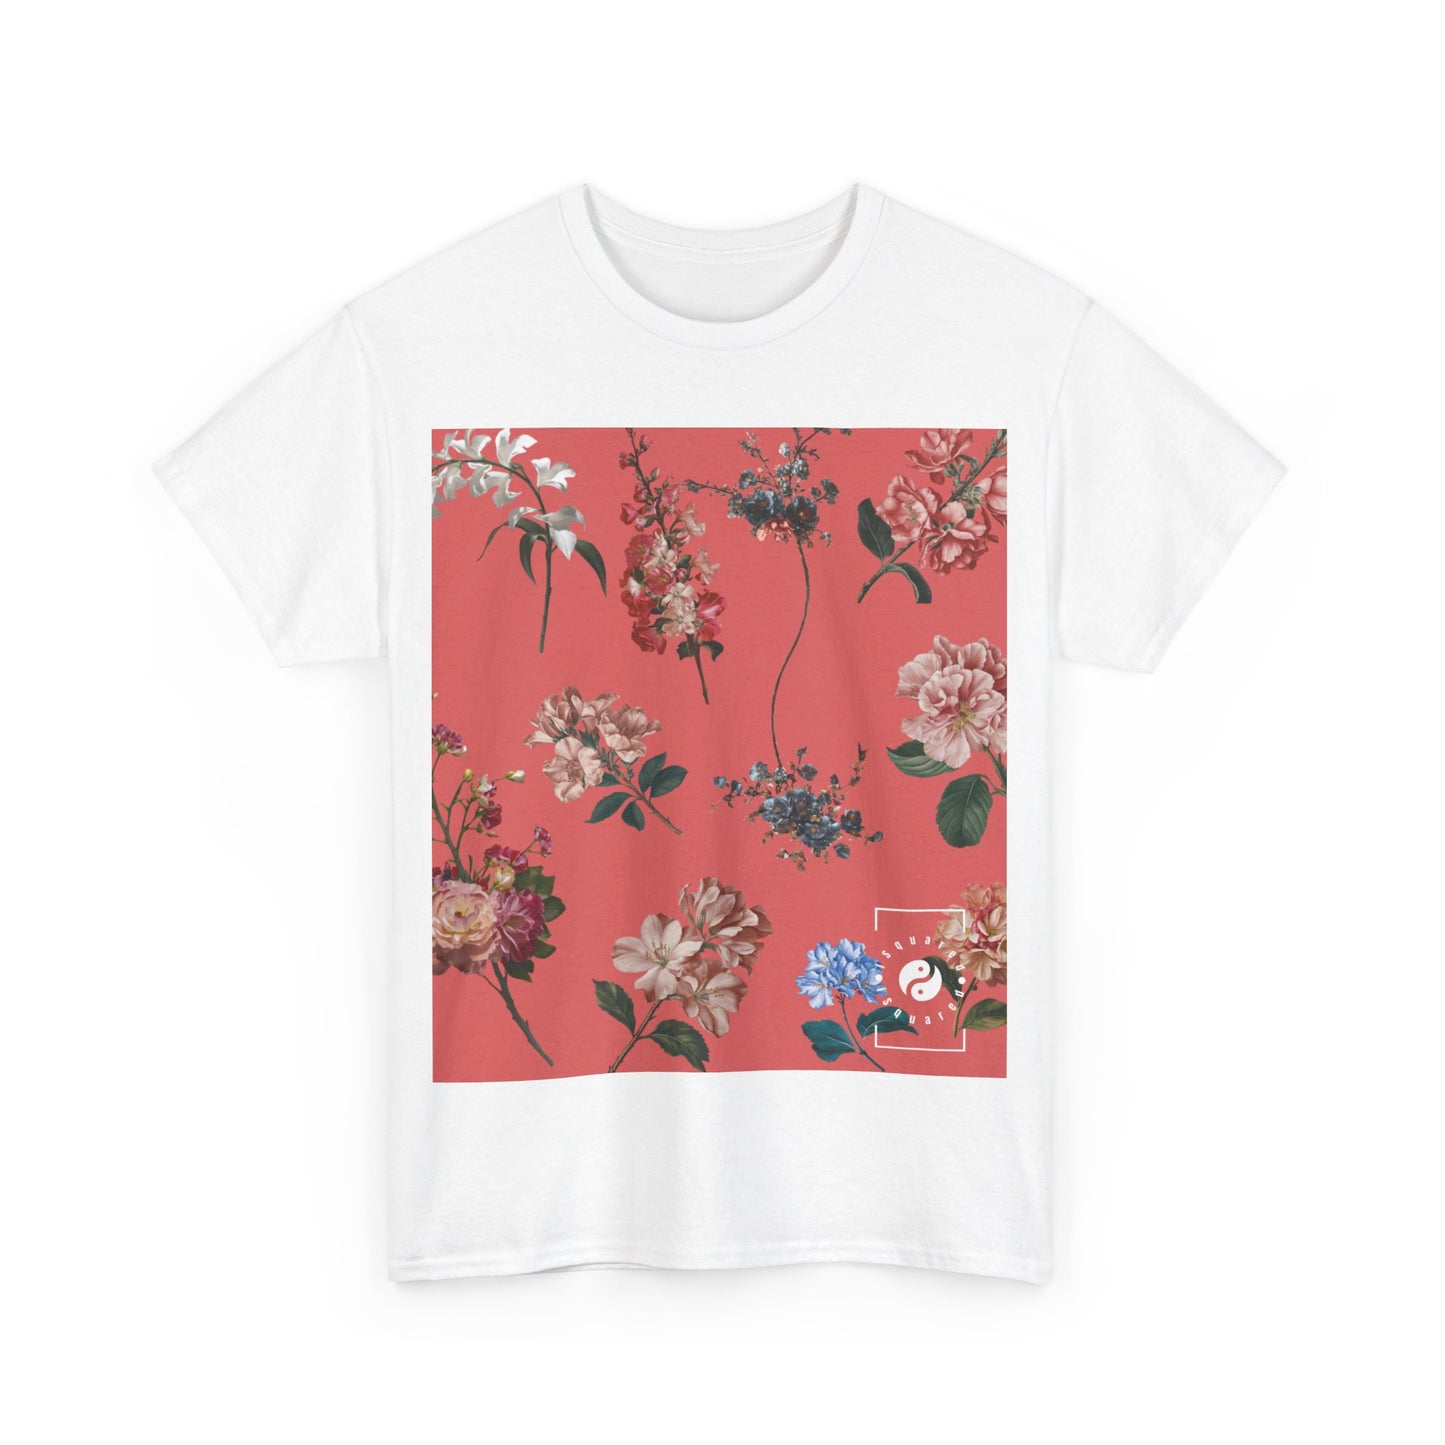 Botanicals on Coral - Heavy T